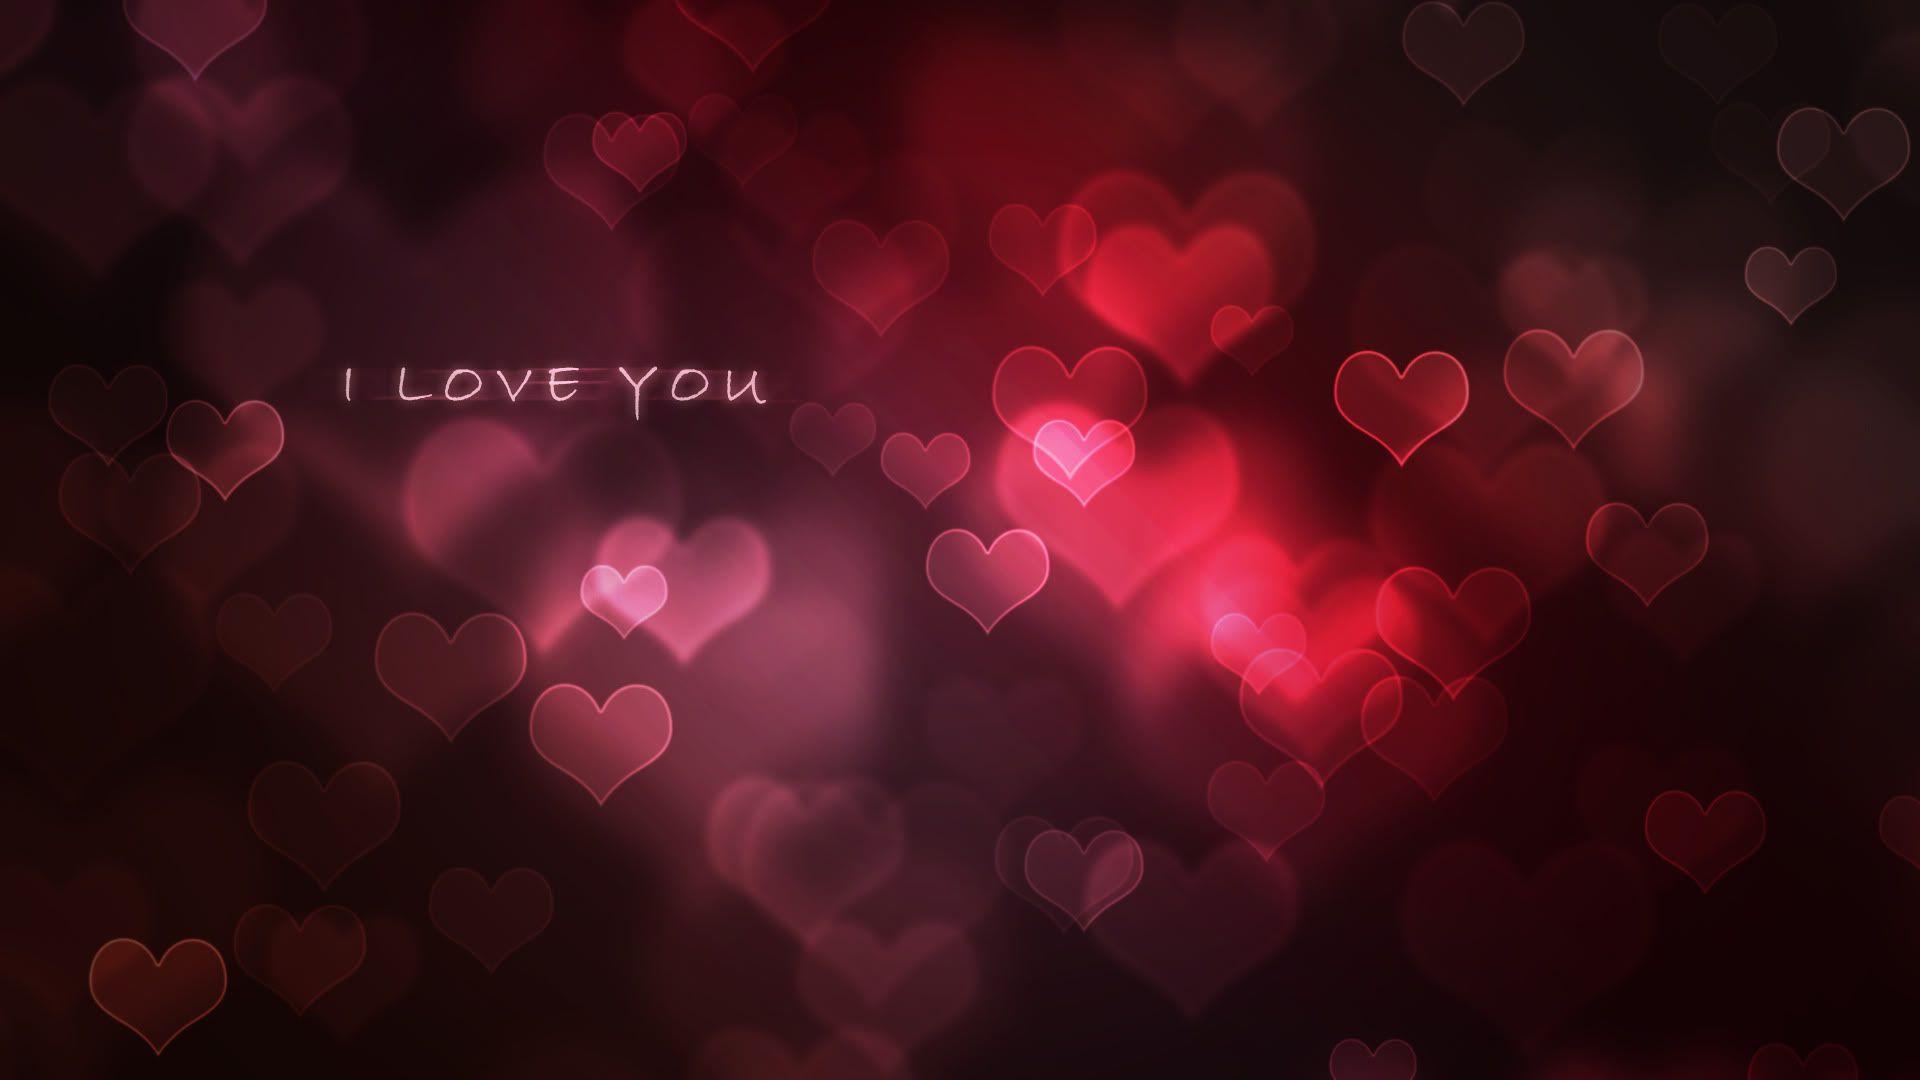 I Love You Background HD Wallpaper of Love